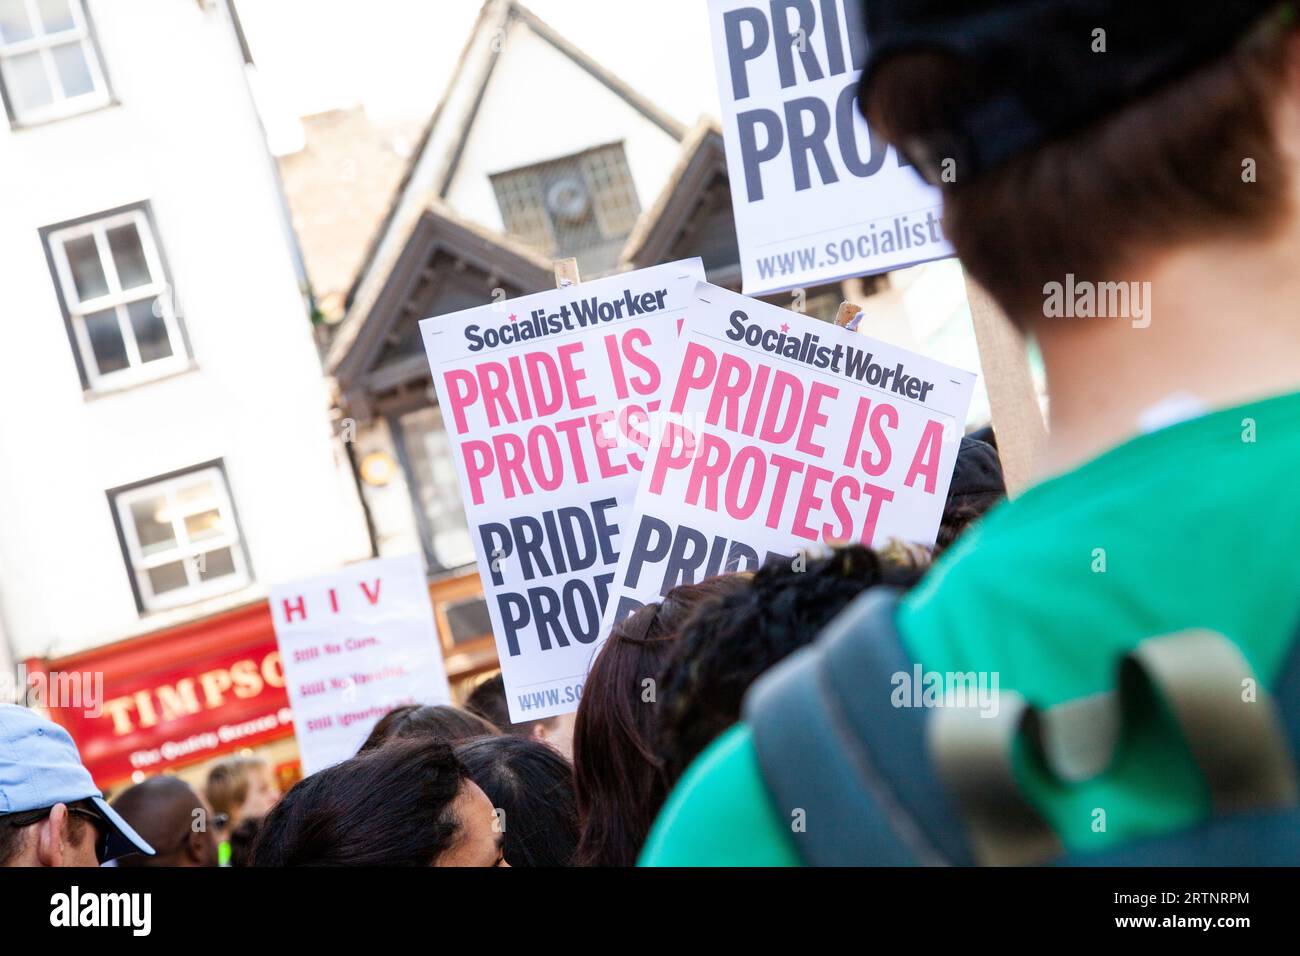 Oxford Pride protest event June 2013 - pride is a protest signage Stock Photo